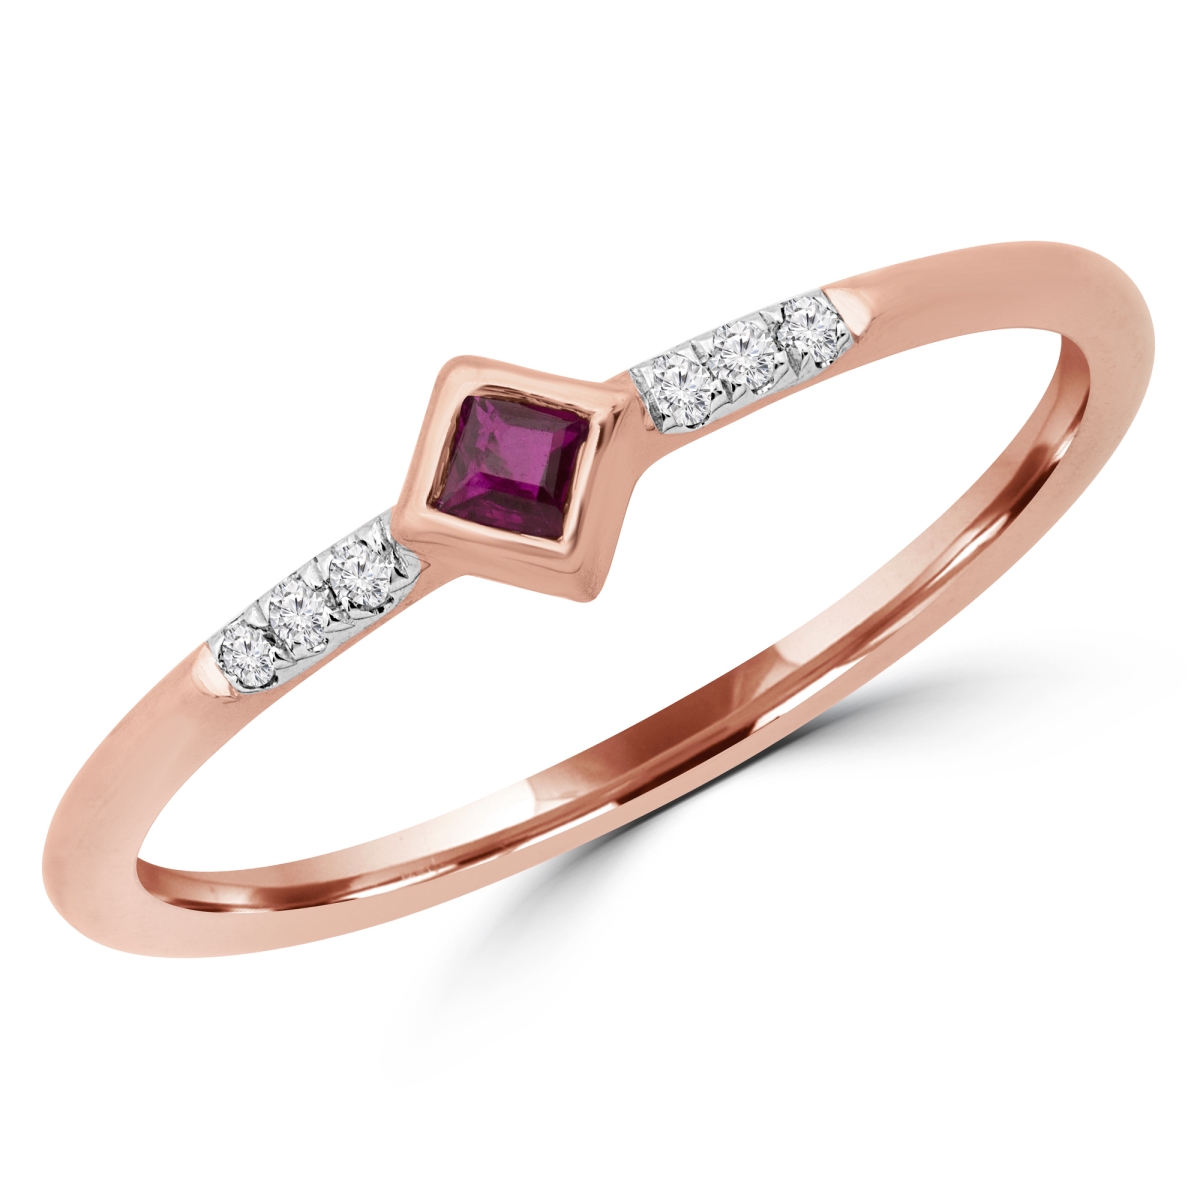 Picture of Majesty Diamonds MDR190078-8.5 0.1 CTW Round Red Ruby Bezel Set Cocktail Ring in 14K Rose Gold - Size 8.5